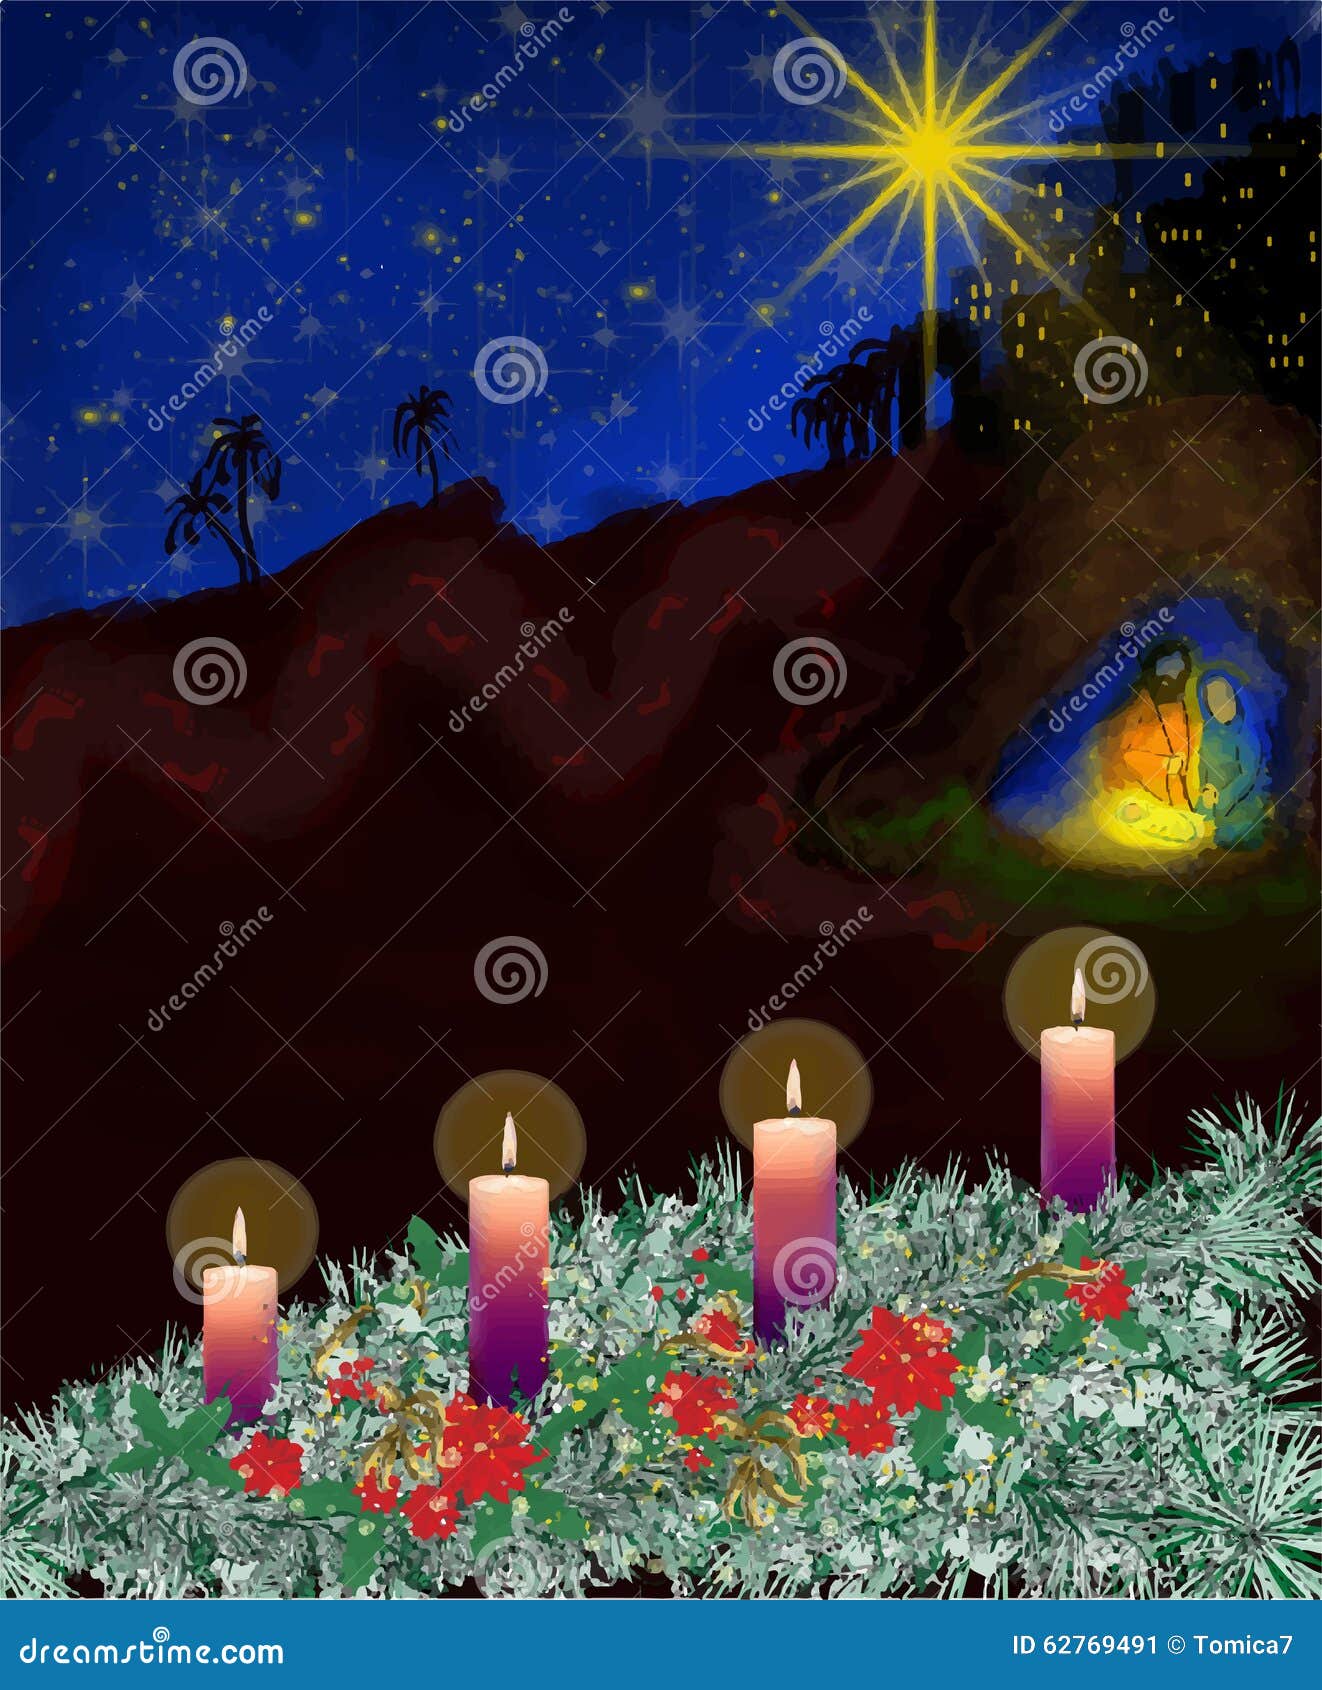 advent wreath christmas nativity scenery advnt as path four candles towards abstract watercolor 62769491